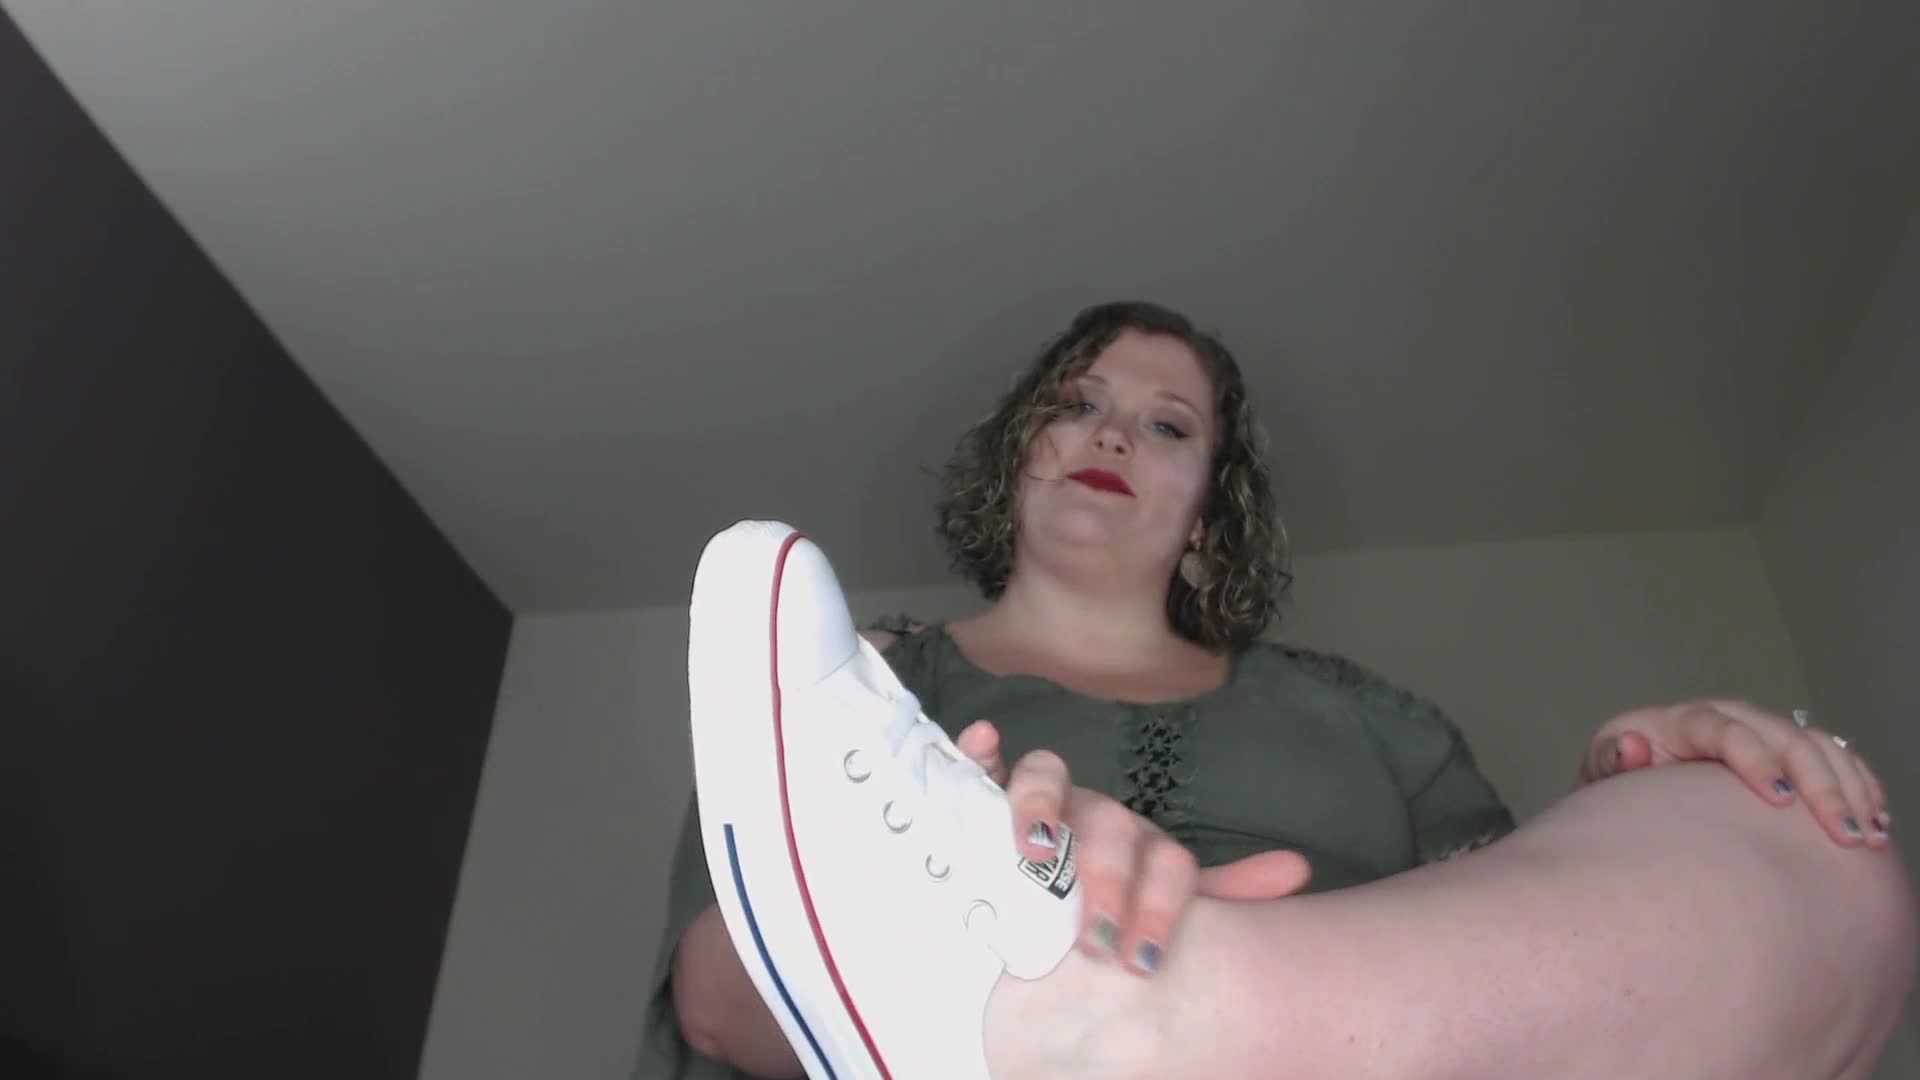 Custom-New Shoes For Loser